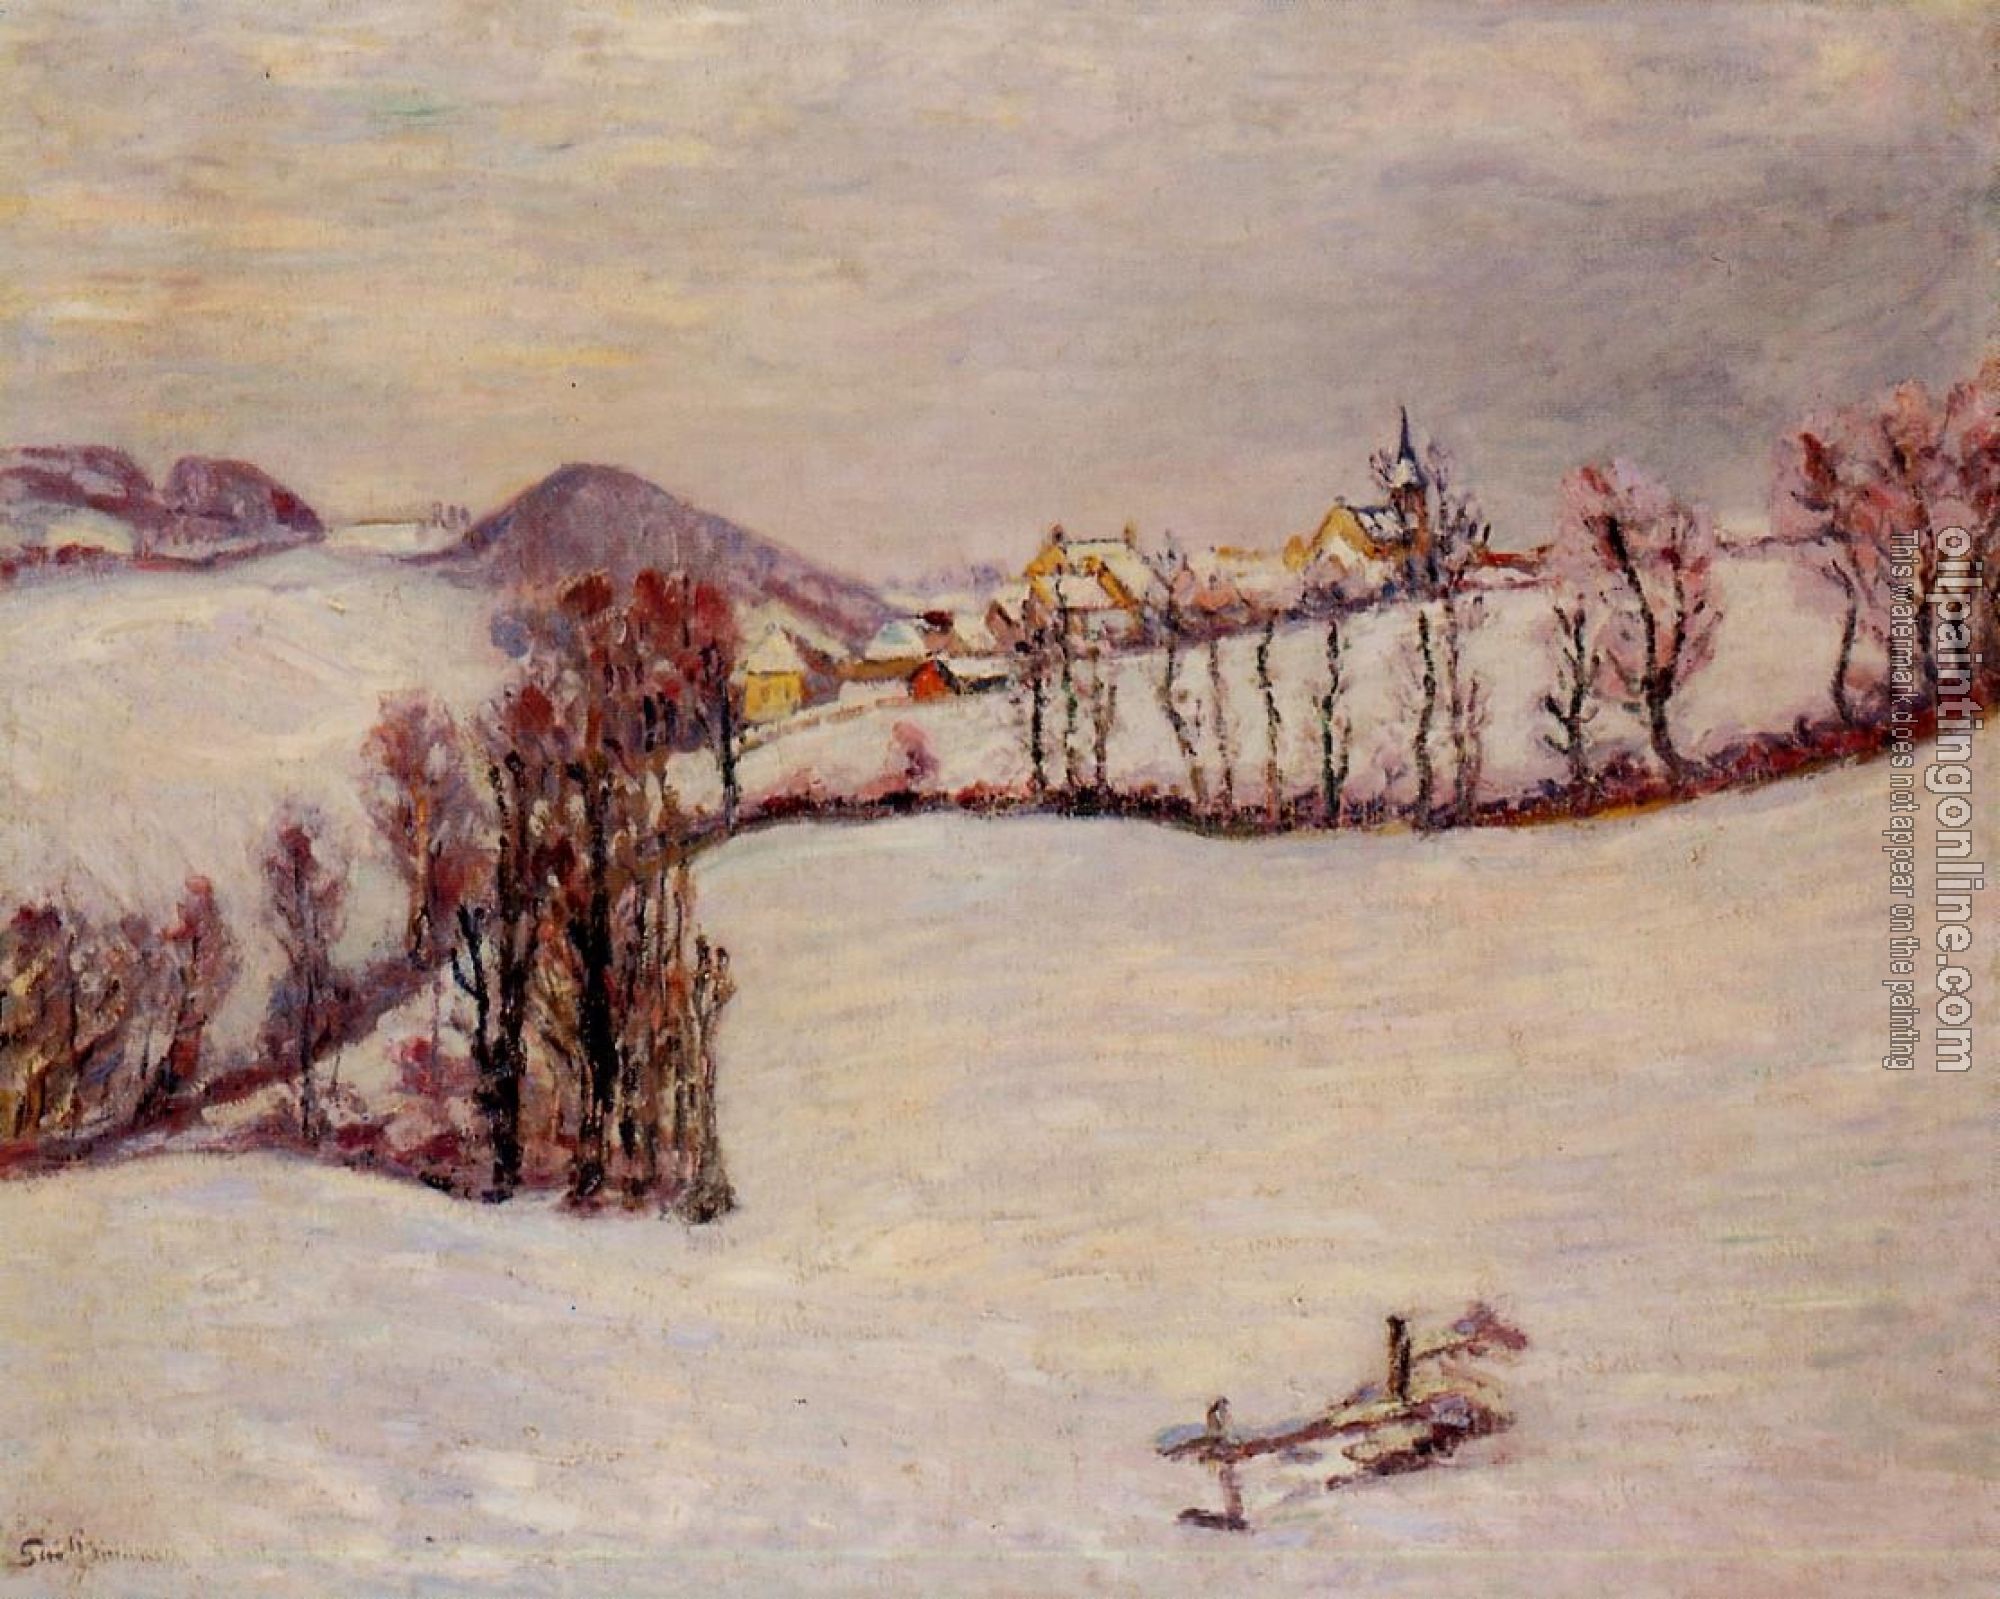 Guillaumin, Armand - Sanit-Sauves in the Snow